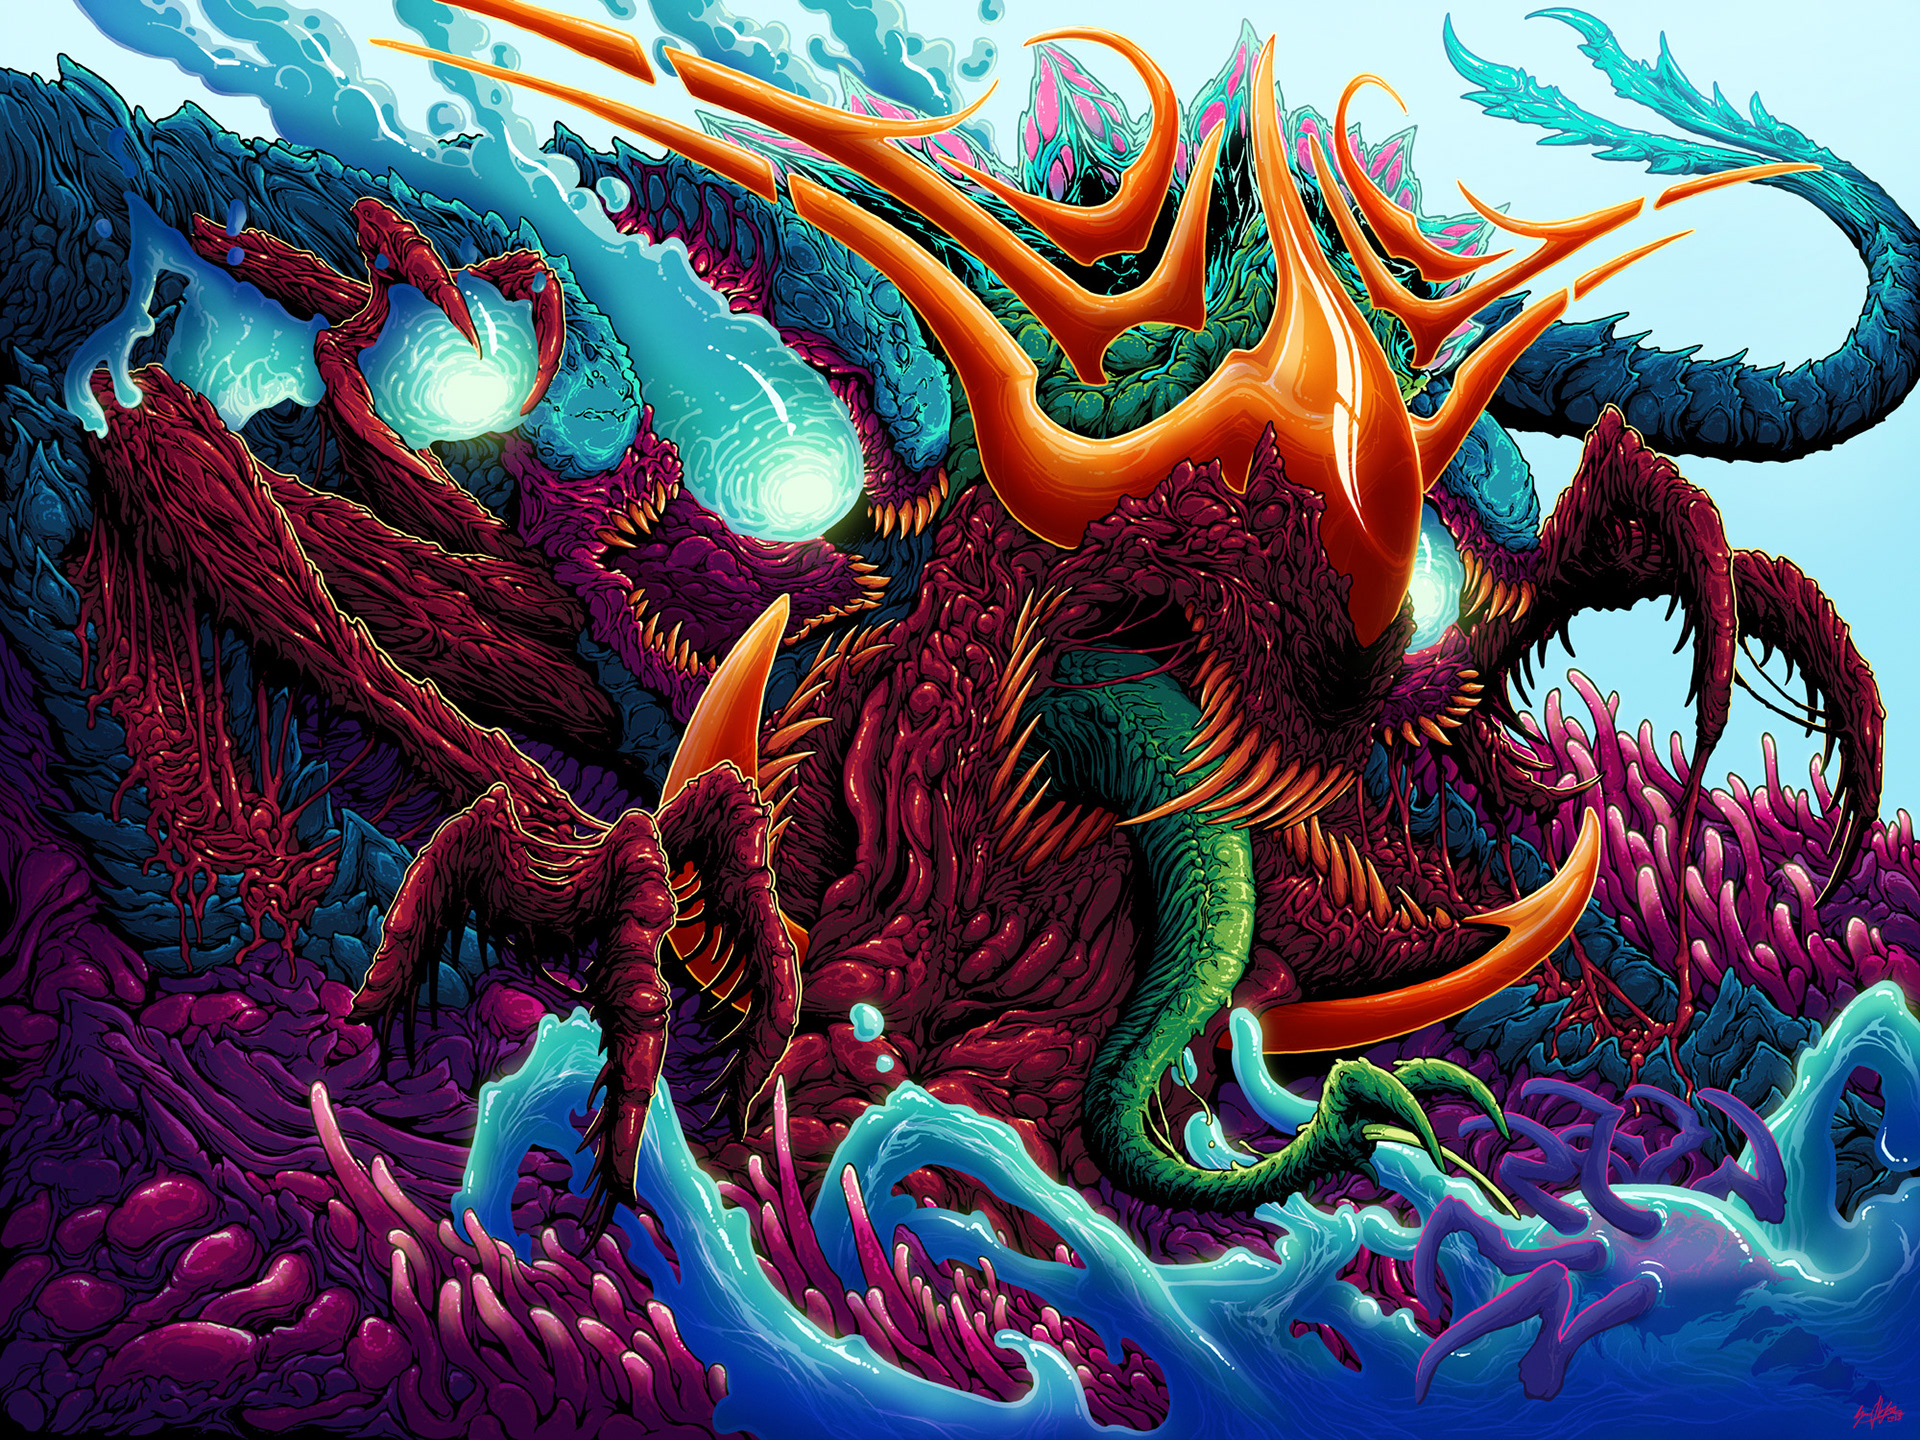 Wallpaper ID 746511  hyperbeast for deskopd craft gaming 4K no  people representation creativity ornate animal themes sculpture  indoors pattern multi colored closeup free download